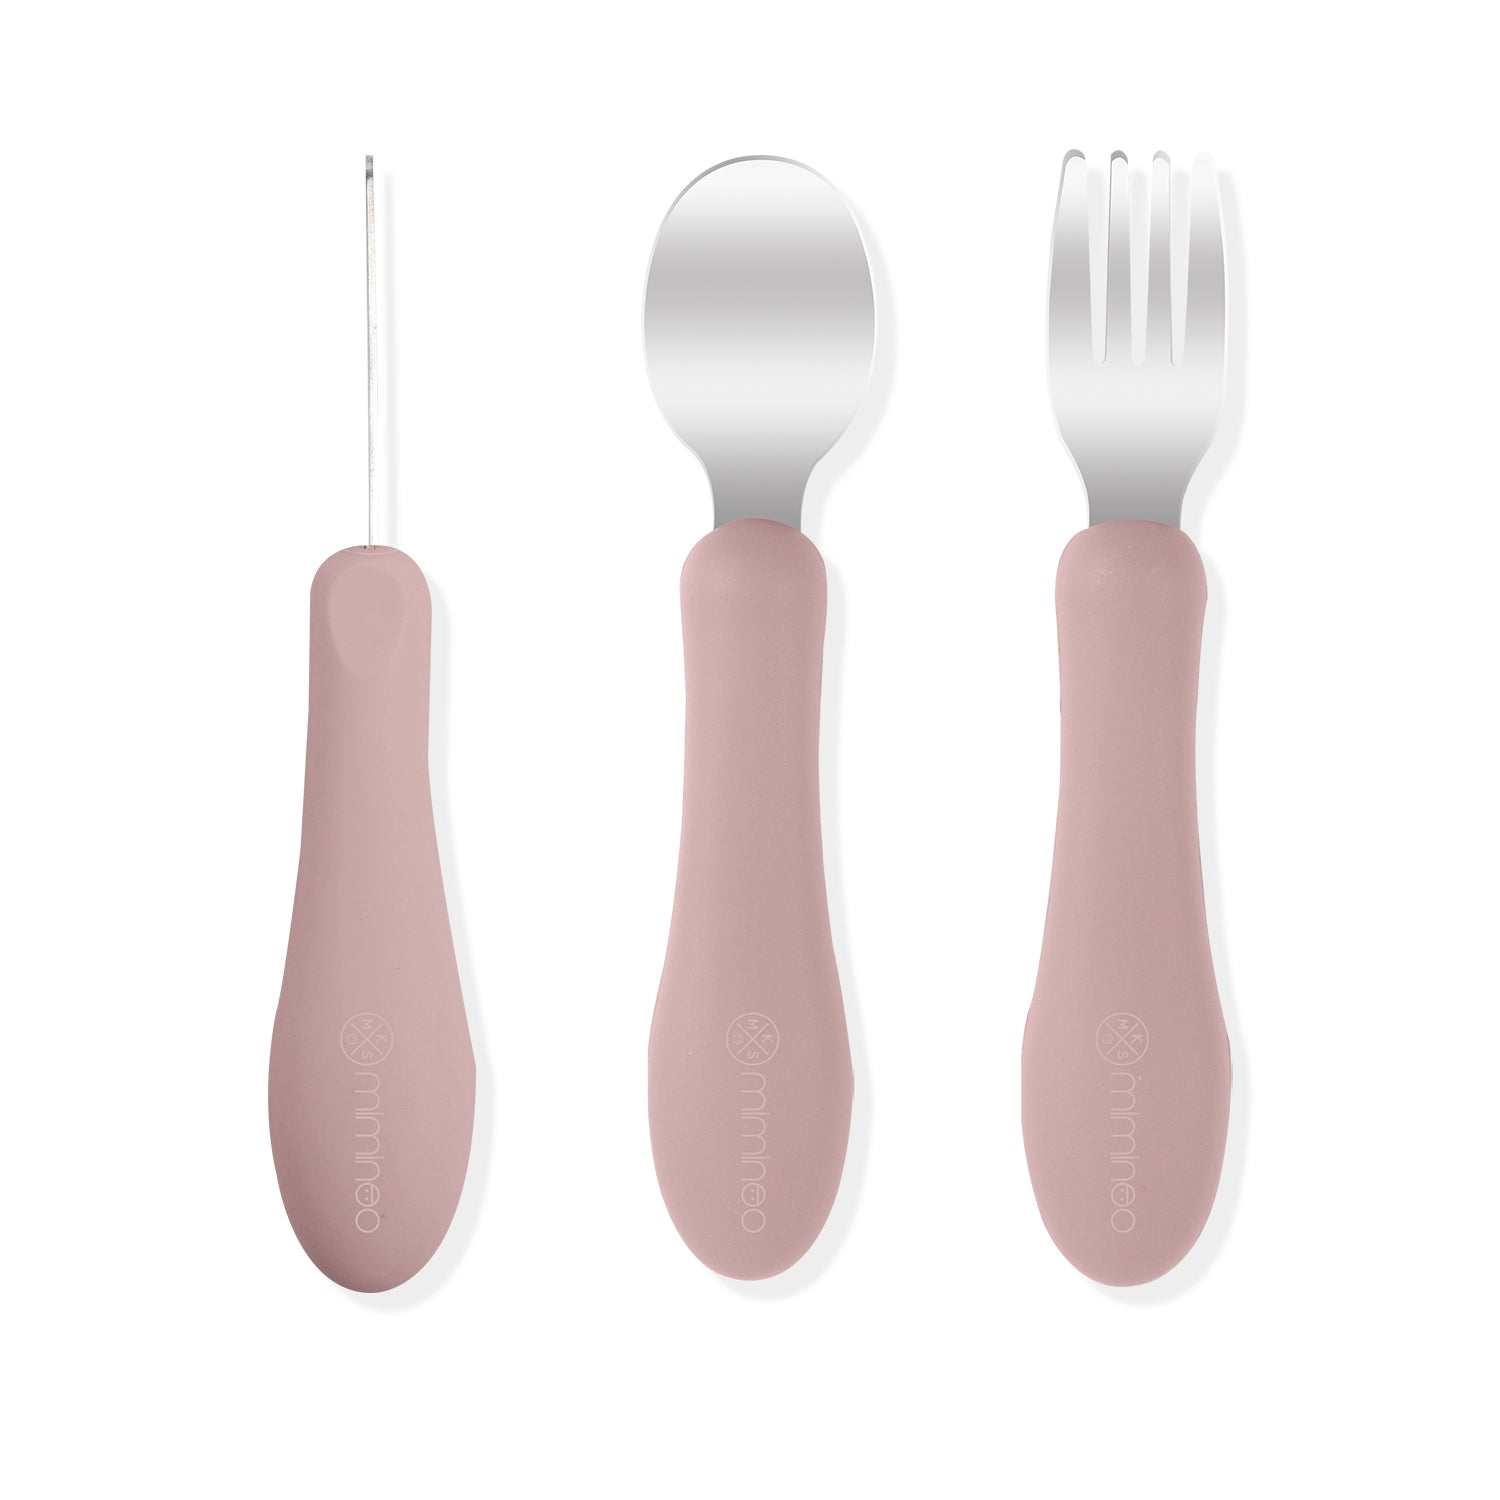 Silicone stainless cutlery utensils fork knife spoon set by mks miminoo usa for toddler kids army green silicone stainless silica soft fork spoon knife utensils cutlery kids toddler babies mks miminoo in lilac pink for girls